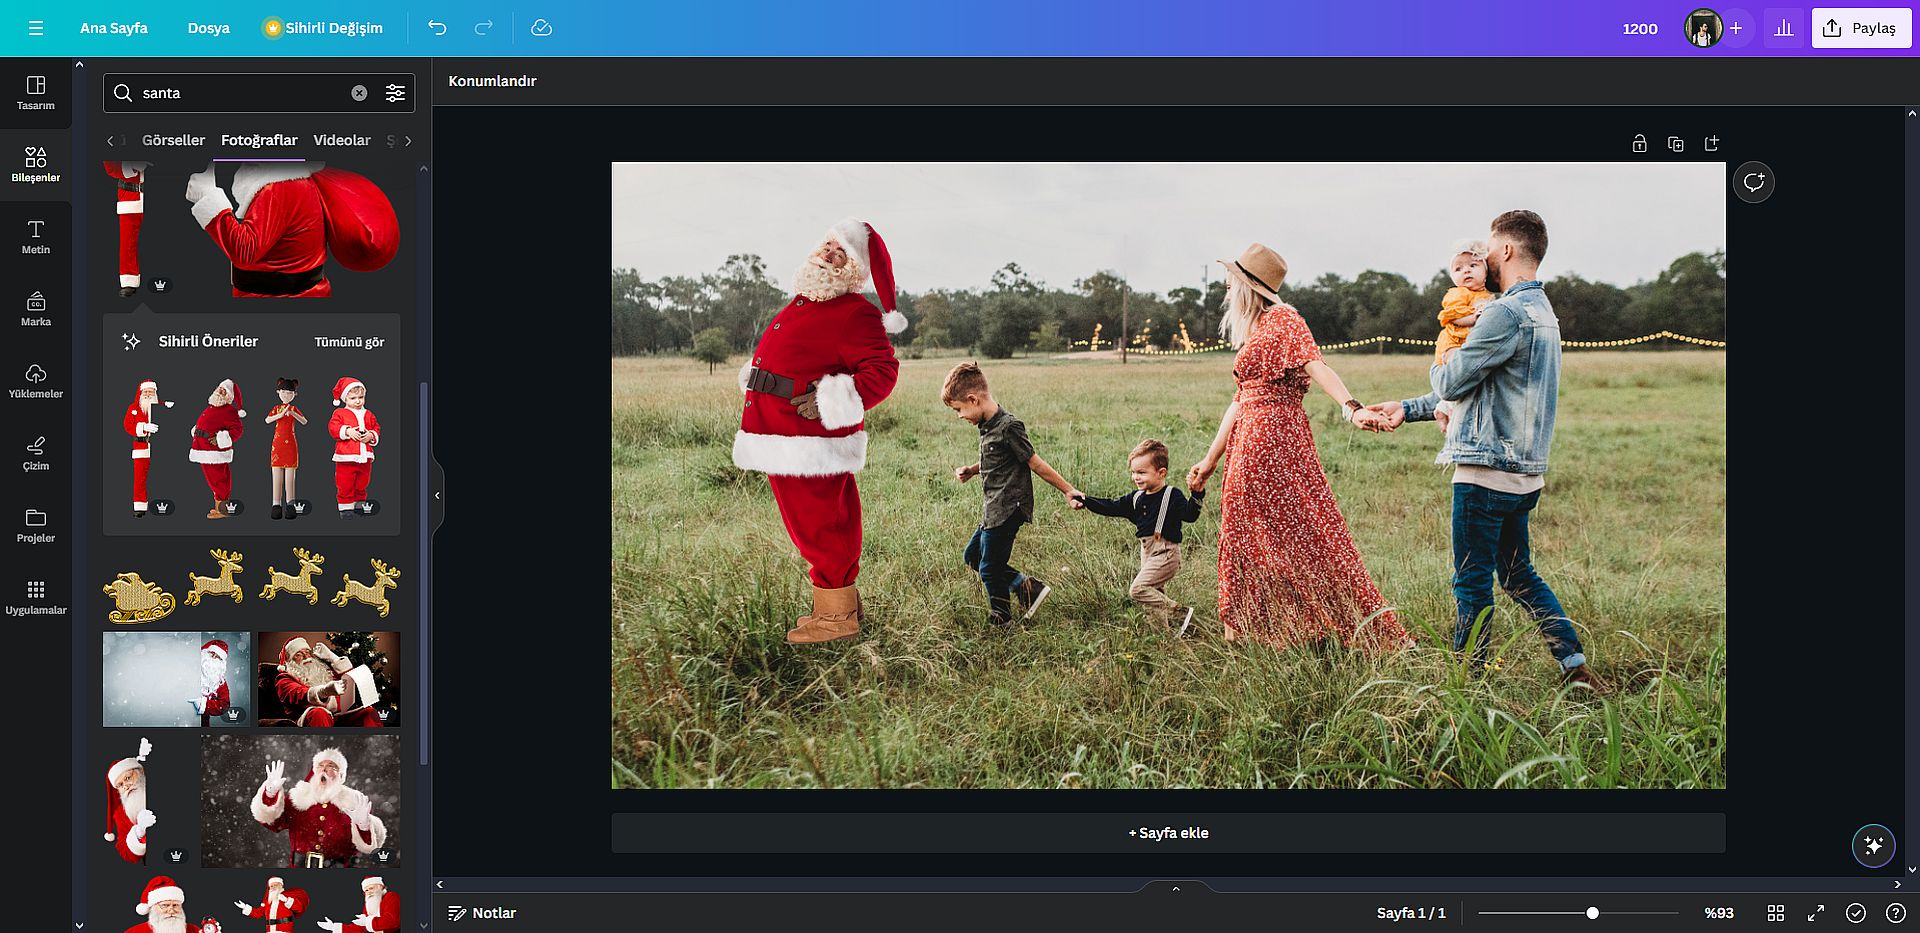 Best AI Christmas Photo generators: Upgrade your holiday photos with AI artistry with DALL-E, Midjourney, Photoshop AI, and more